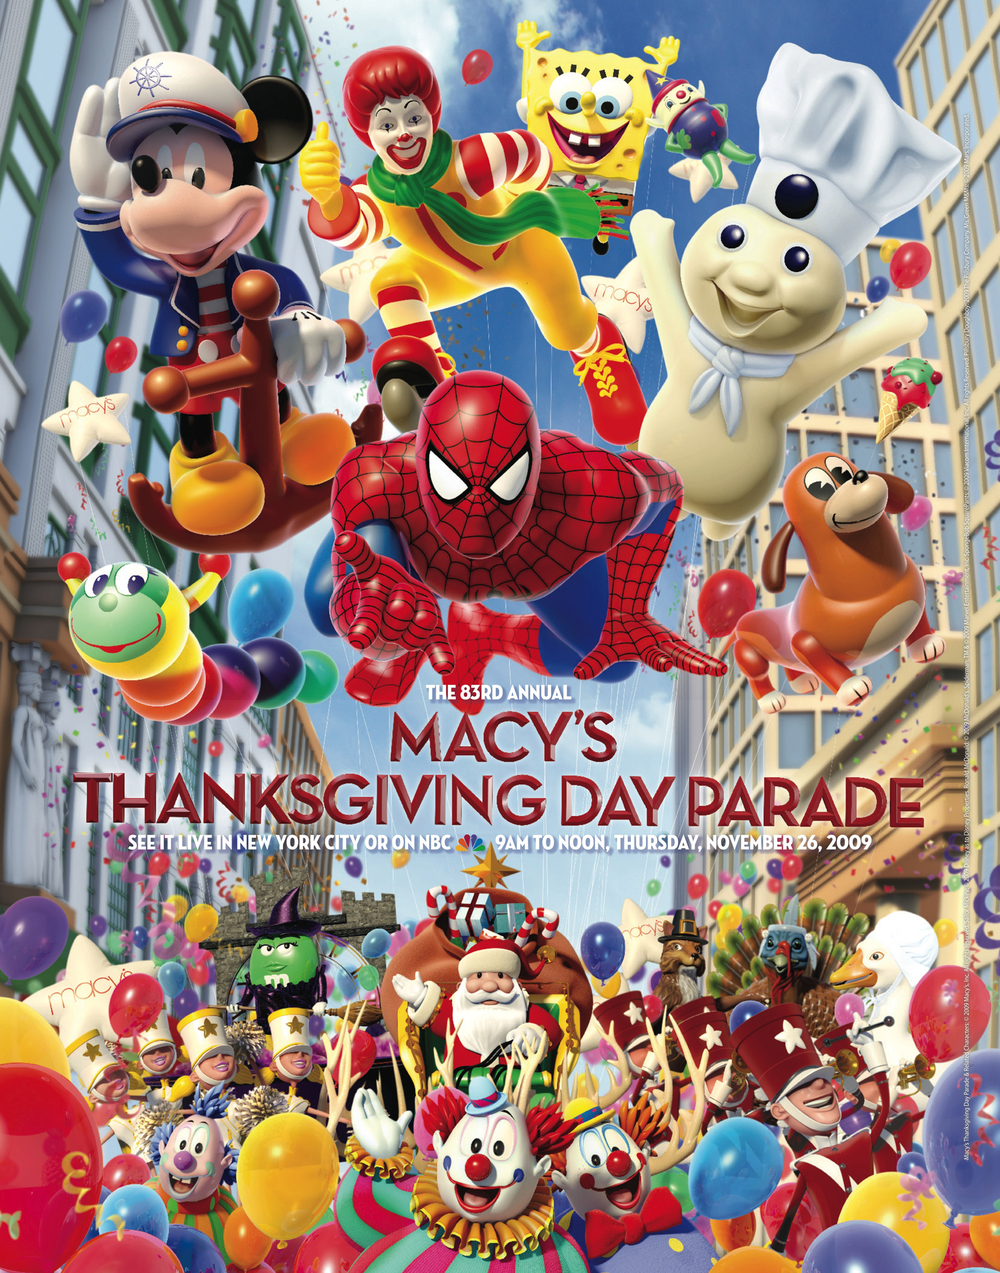 The 83rd Annual Macy's Thanksgiving Day Parade Macy's Thanksgiving